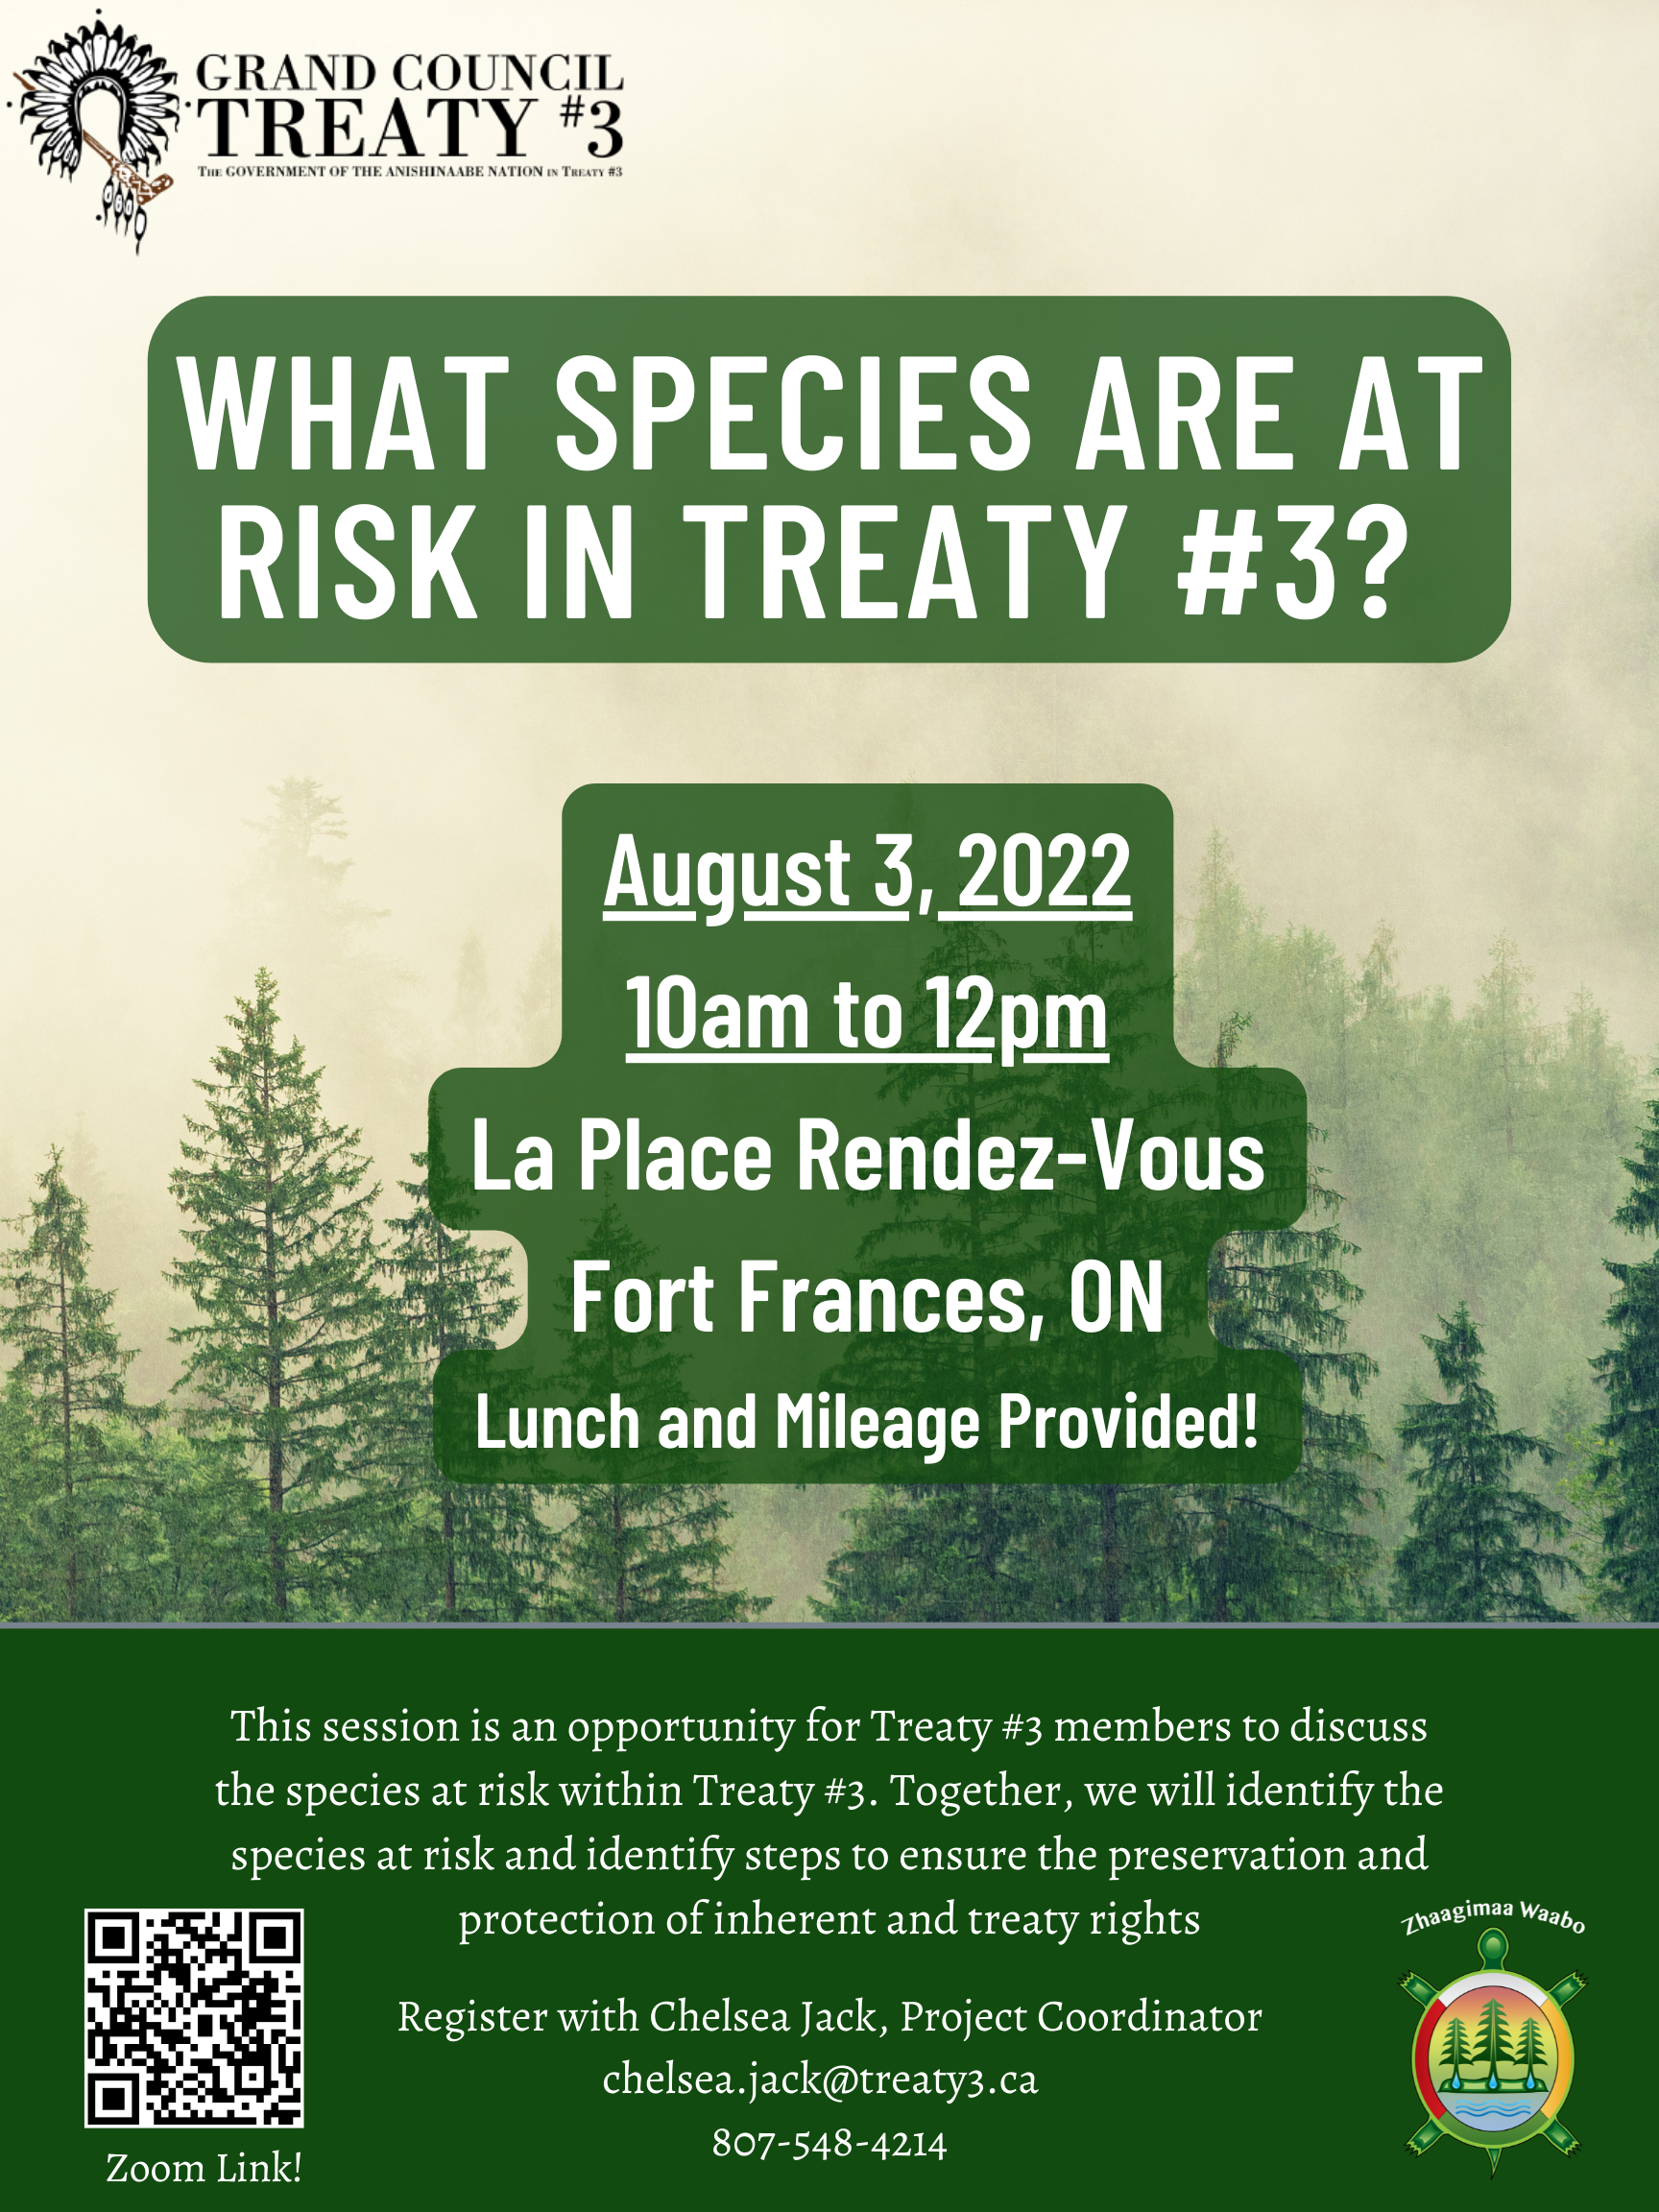 Species at Risk Engagement Session